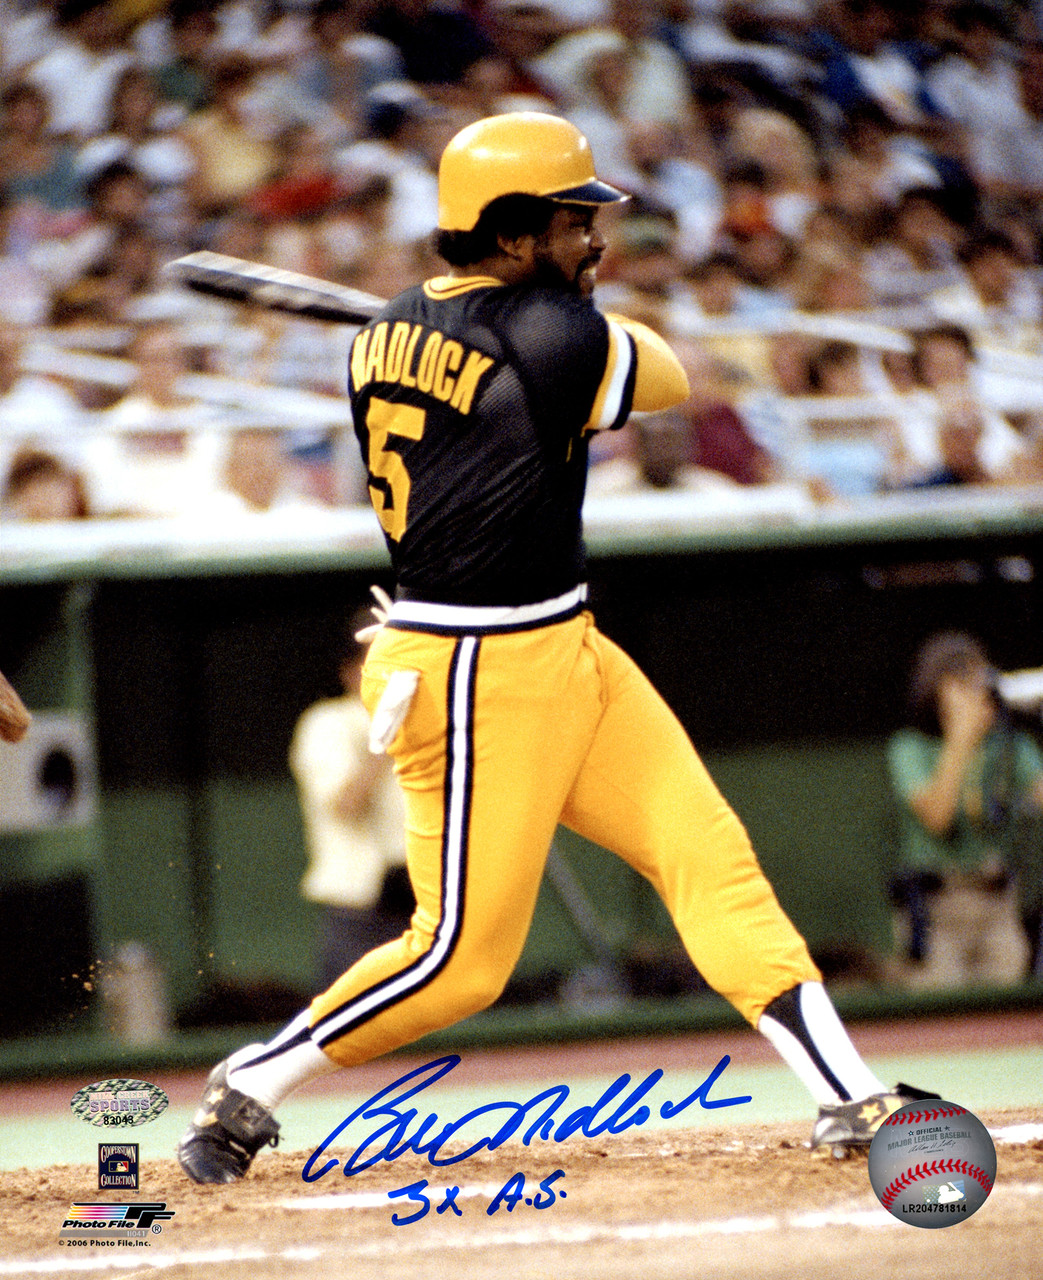 AUTOGRAPHED AL OLIVER 8x10 Pittsburgh Pirates Photo